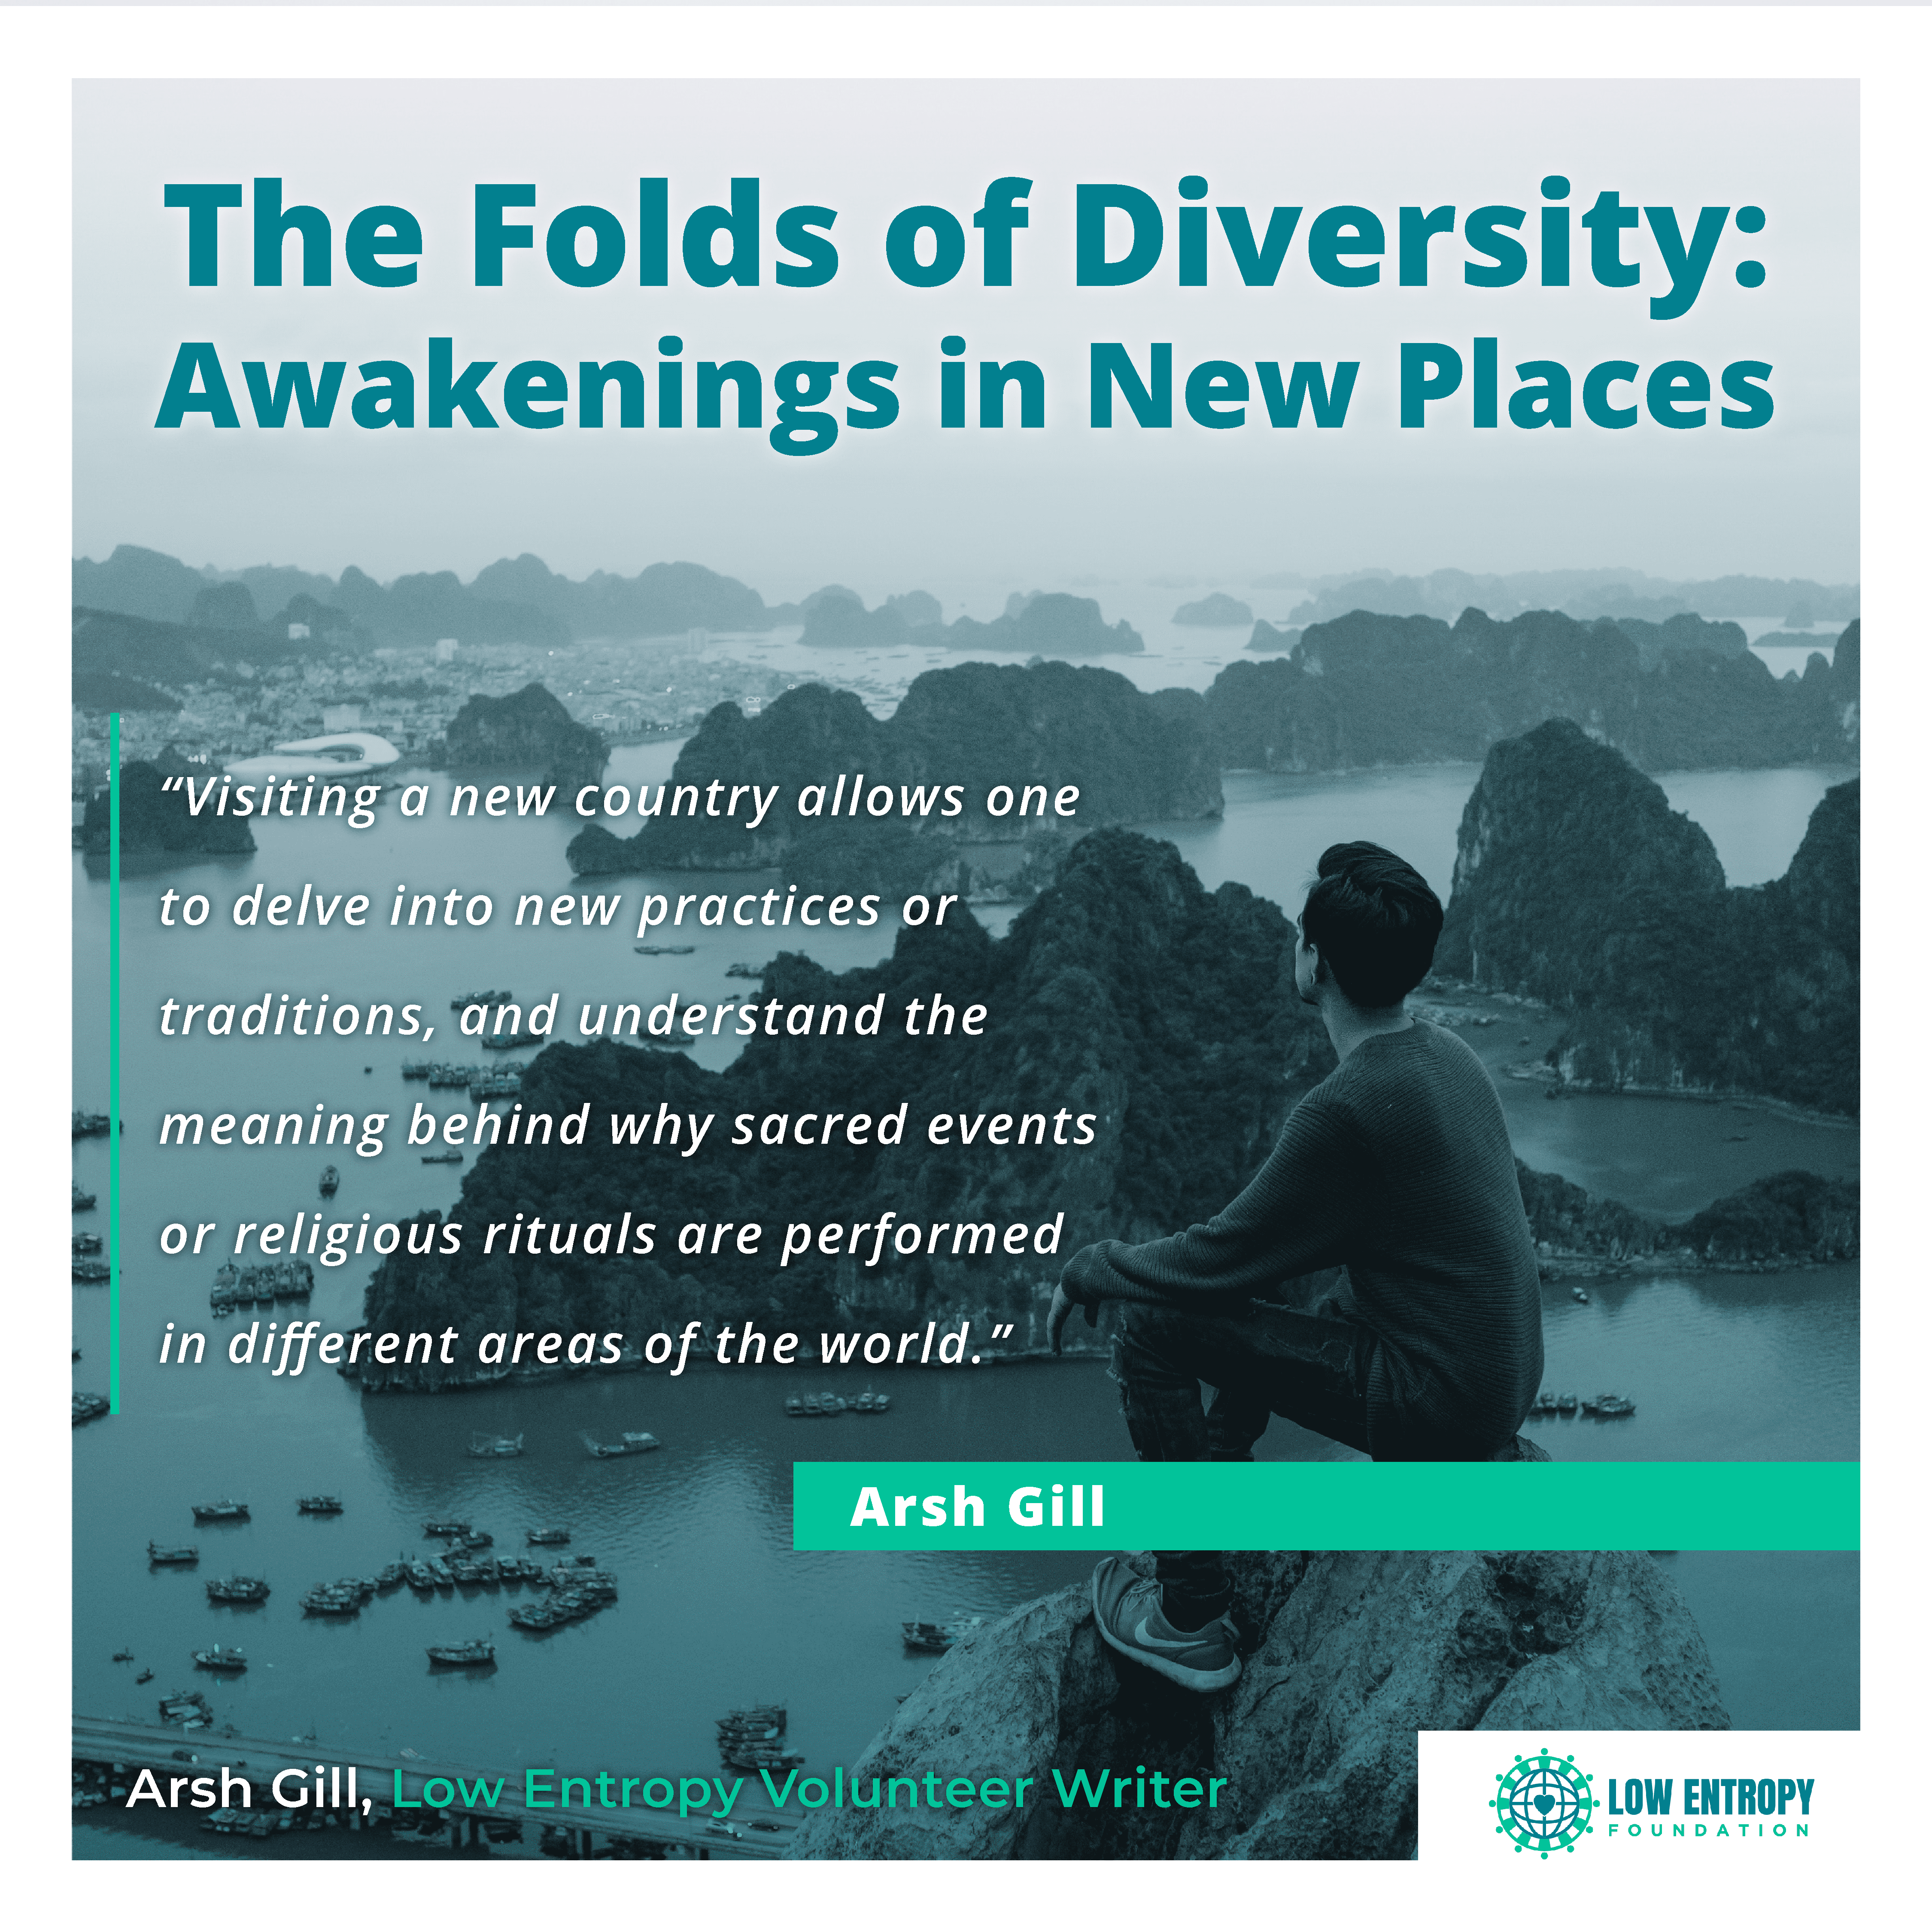 The Folds of Diversity: Awakenings in New Places